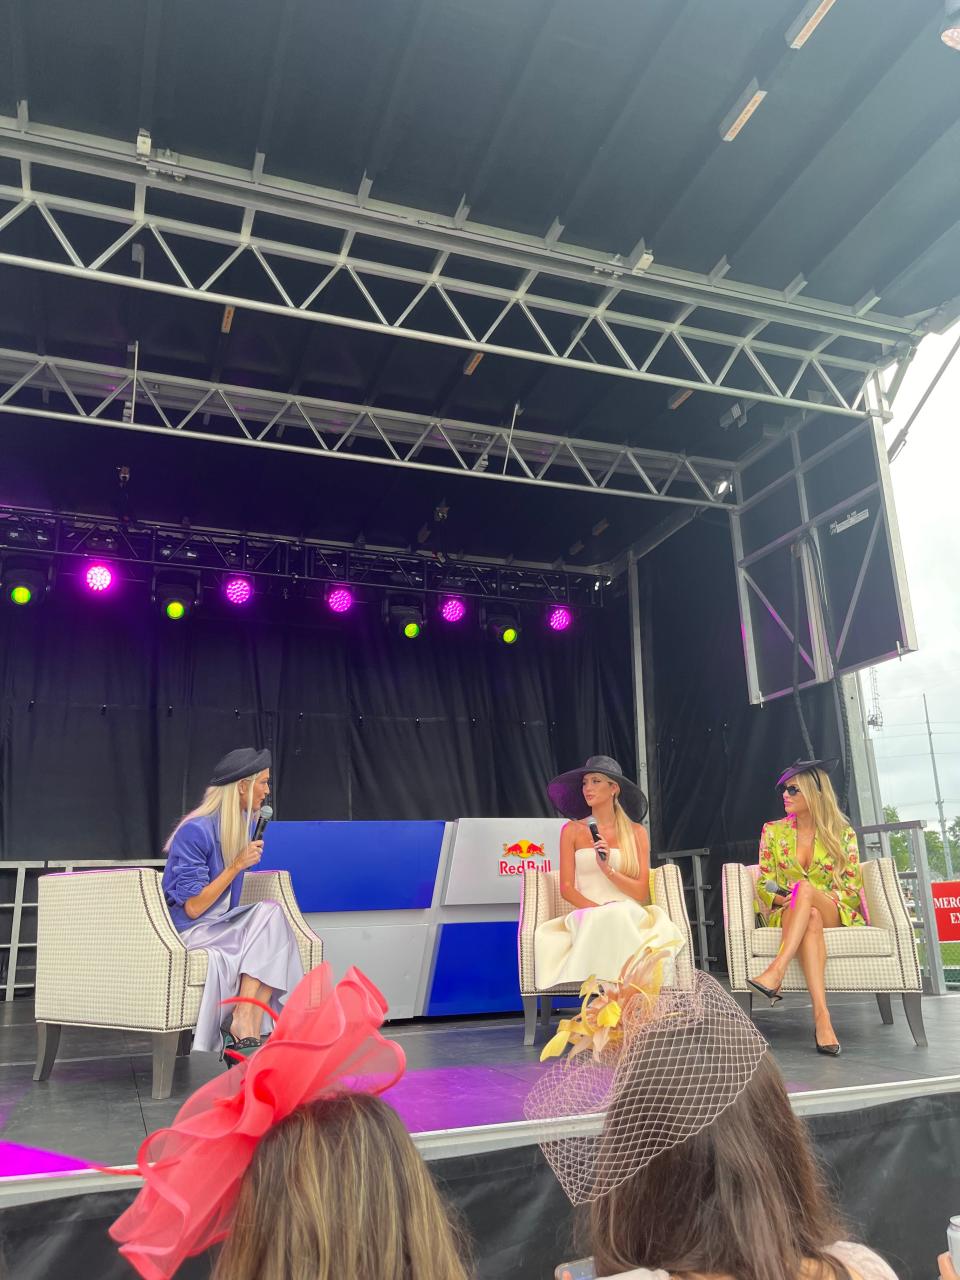 Alex Cooper, host for the “Call Her Daddy” podcast, and Alix Earle, the podcast host for “Hot Mess,” talked to Kentucky Derby attendees on the Infield’s main stage on Saturday morning at Churchill Downs in Louisville.